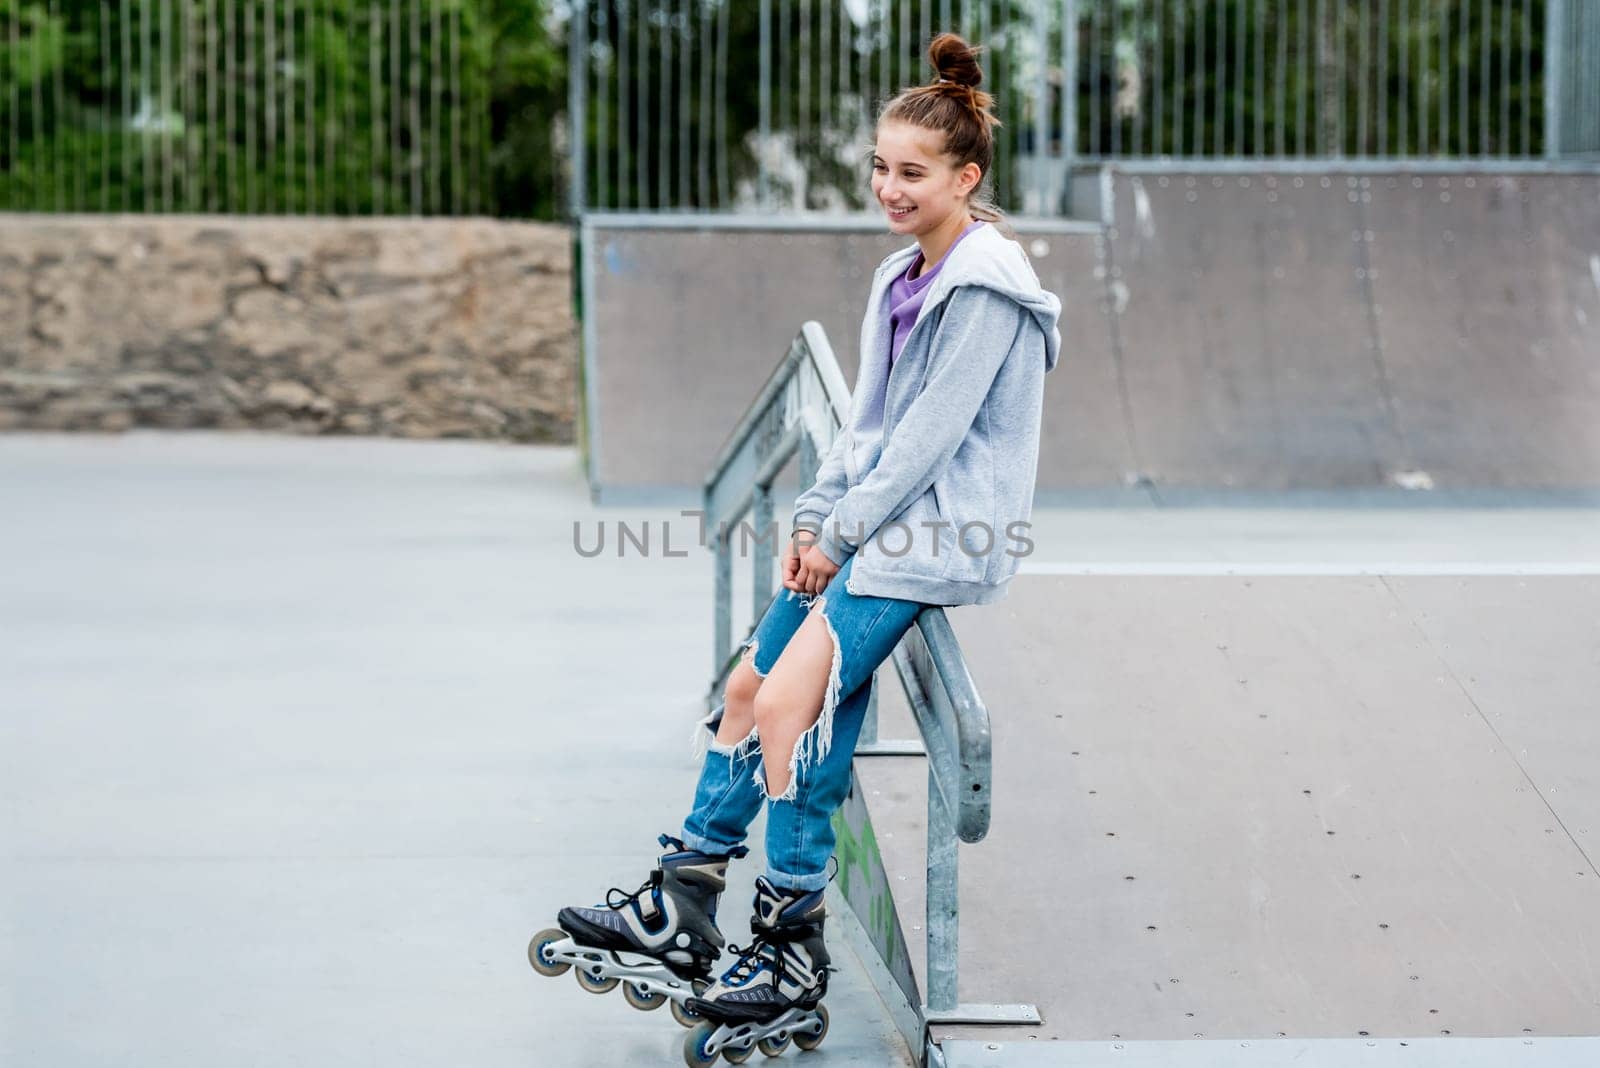 Beautiful girl roller skater riding in city park with ramp. Pretty female teenager rollerskating in casual clothes